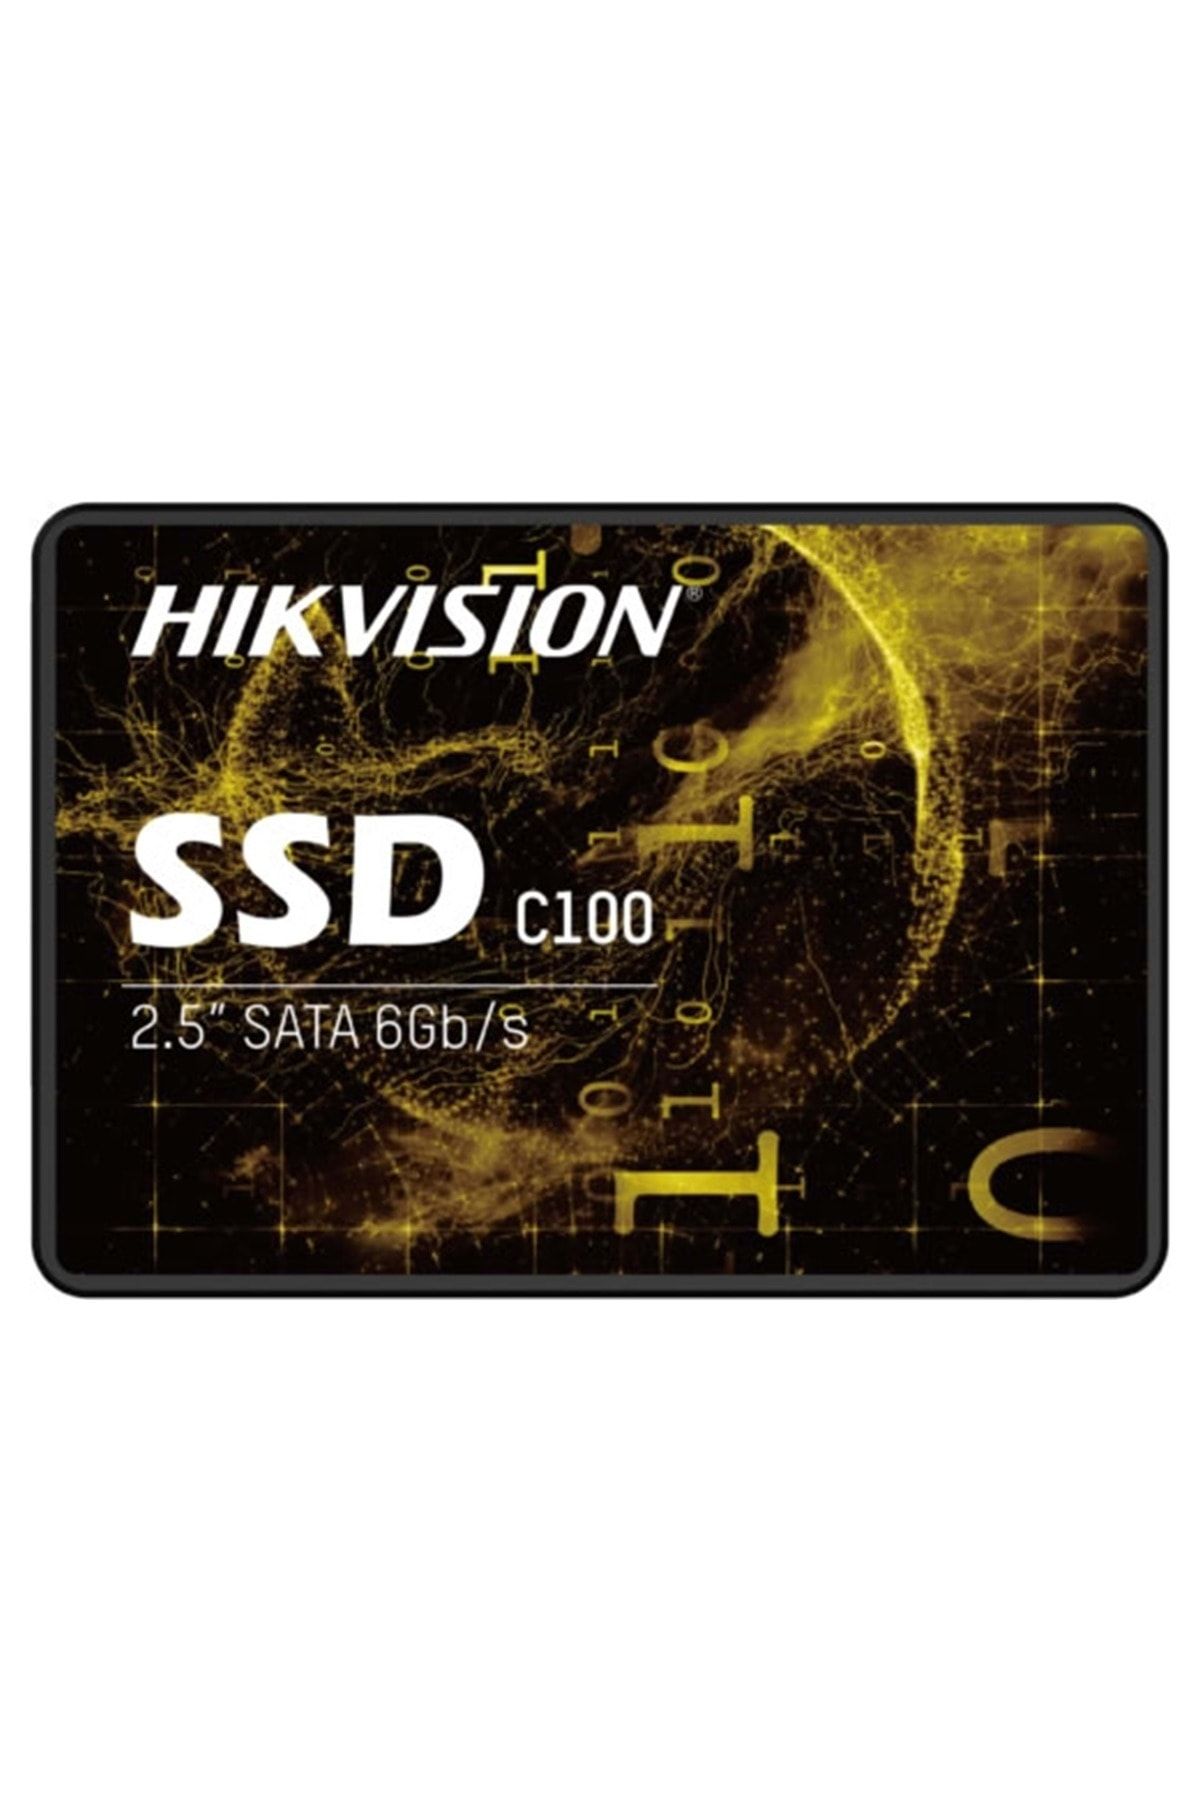 Hikvision HİKVİSİON HS-SSD-C100 480GB SSD 2.5" 6Gb/s